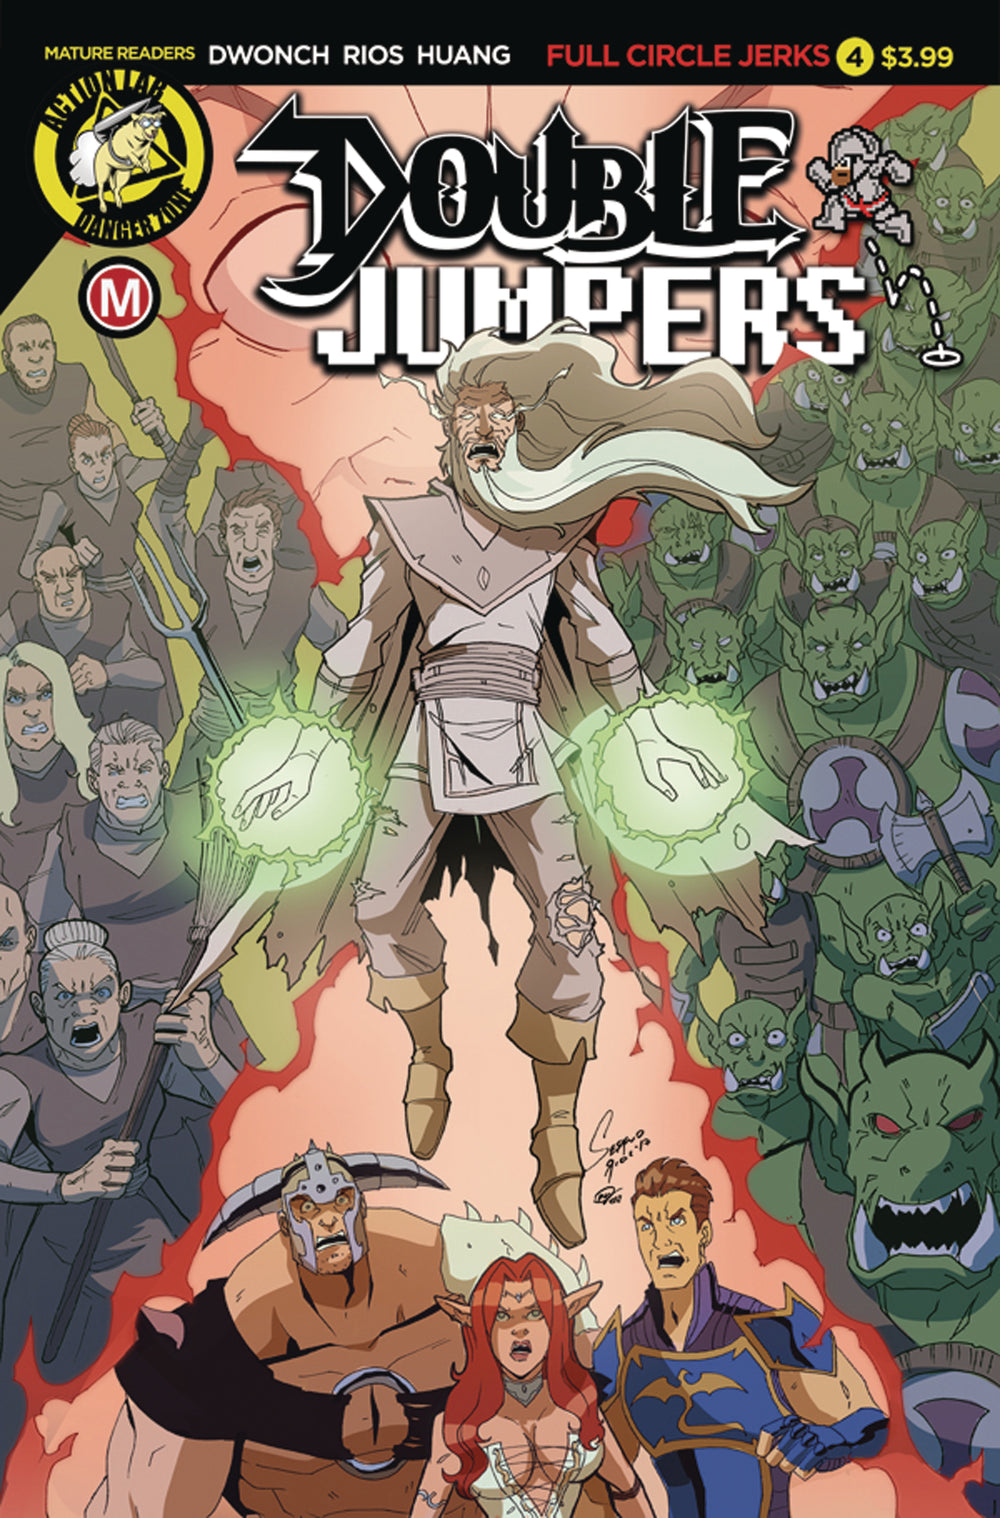 DOUBLE JUMPERS FULL CIRCLE JERKS #4 (OF 4) CVR A RIOS (MR)